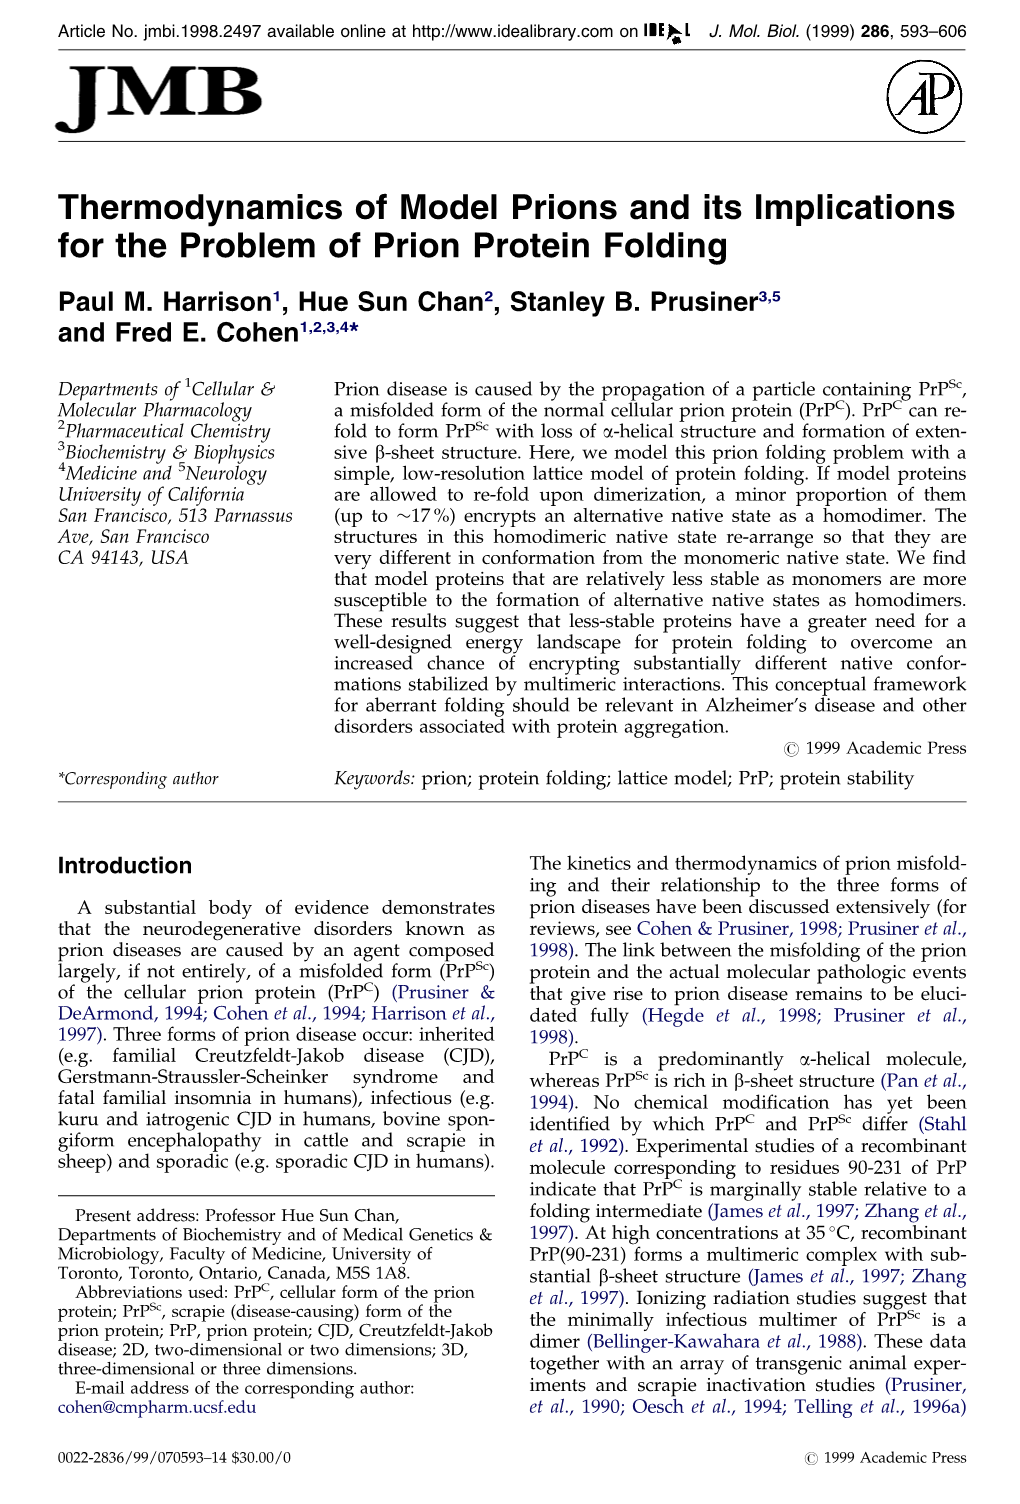 Thermodynamics of Model Prions and Its Implications for the Problem of Prion Protein Folding